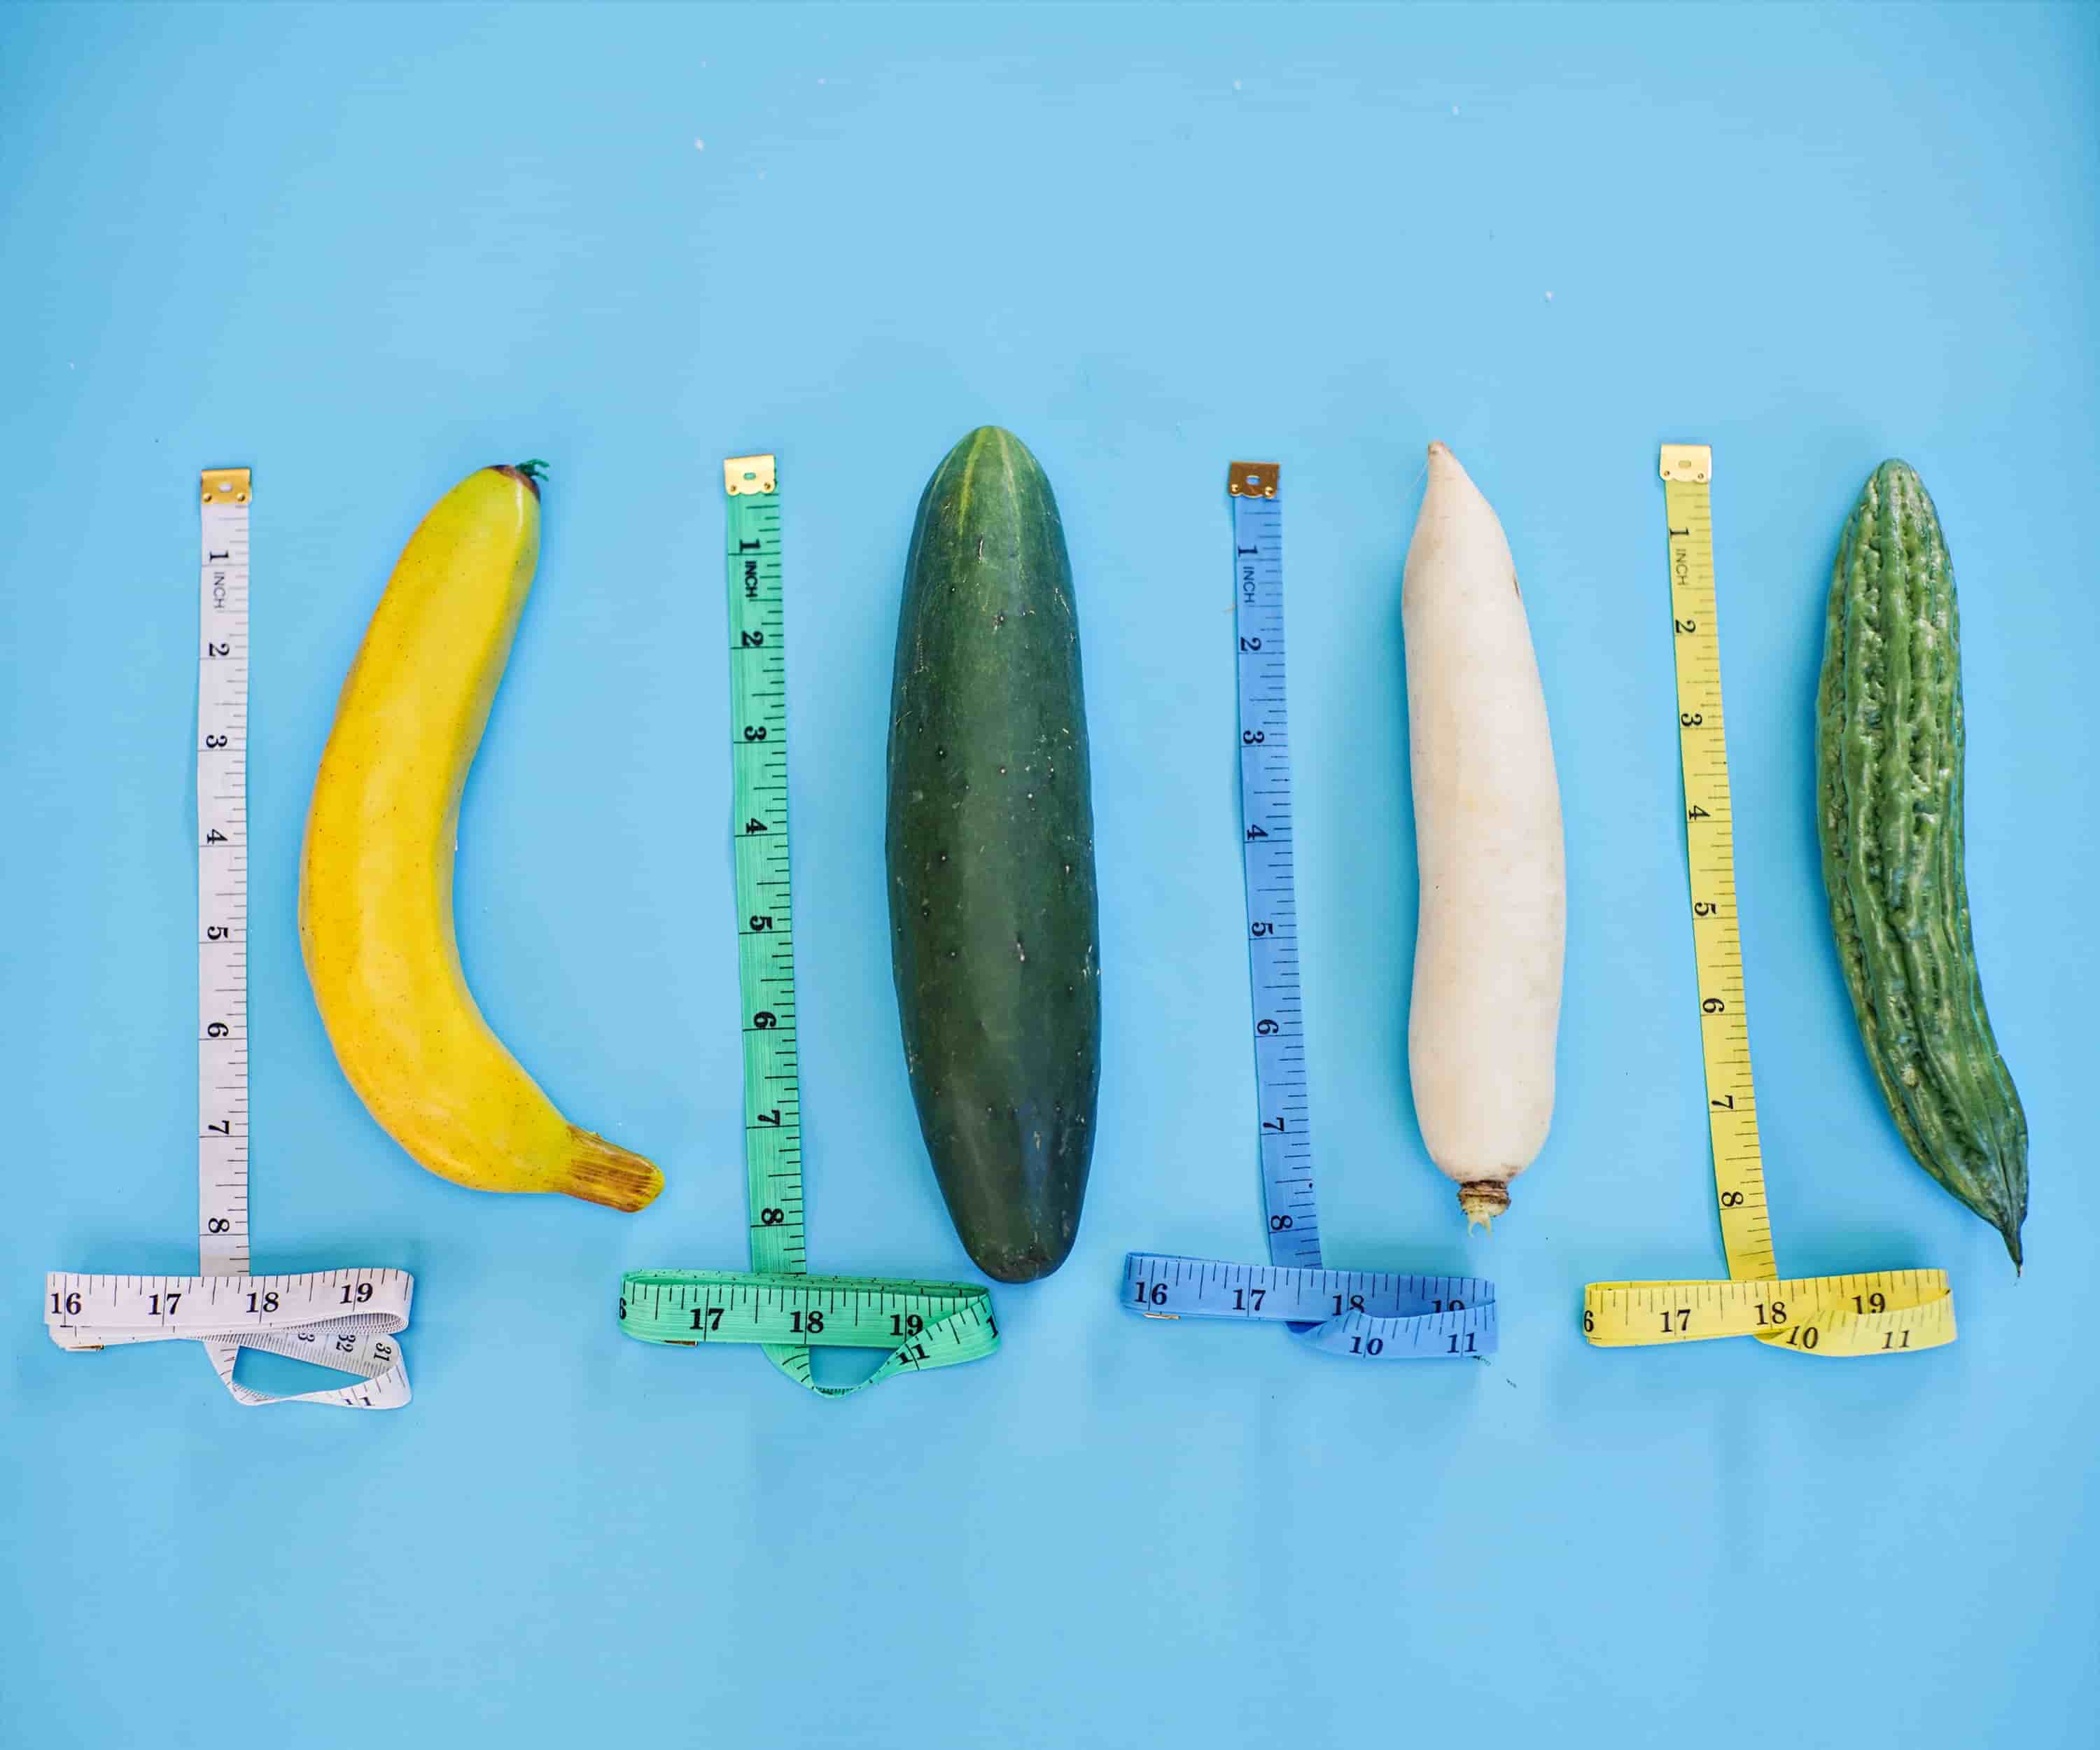 A collection of vegetables next to measuring equipment on a blue background